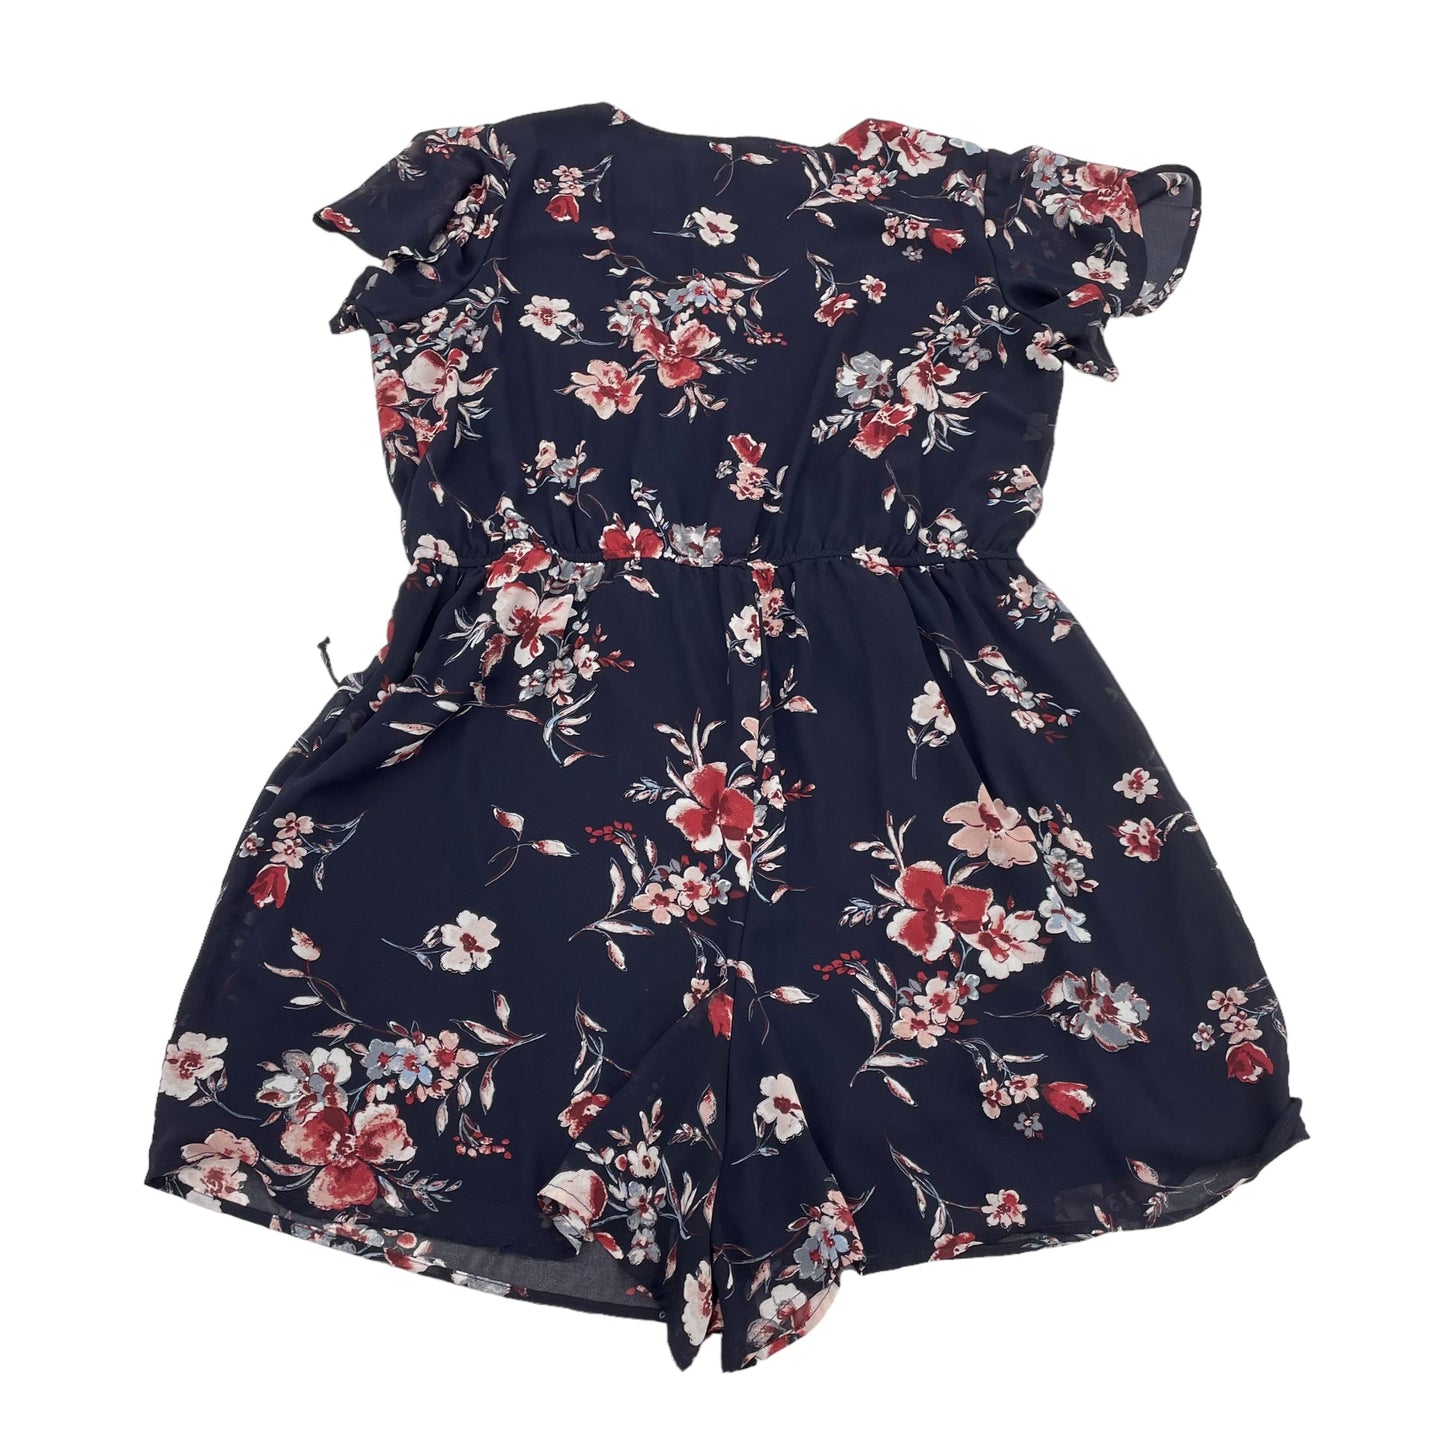 NAVY MAURICES ROMPER, Size 2X